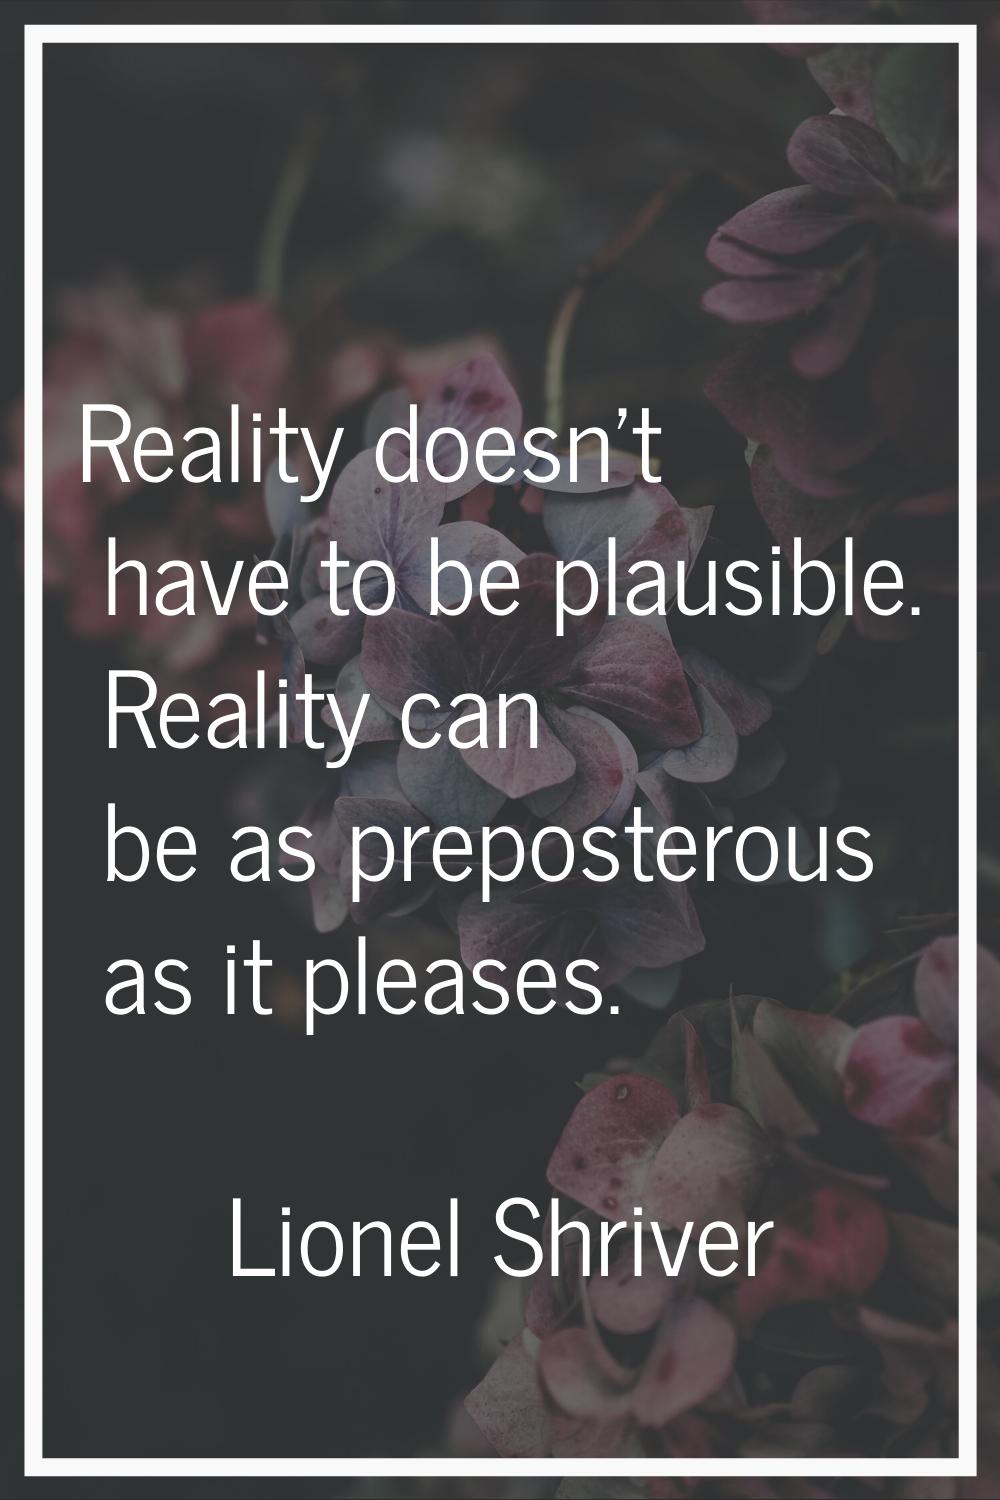 Reality doesn't have to be plausible. Reality can be as preposterous as it pleases.